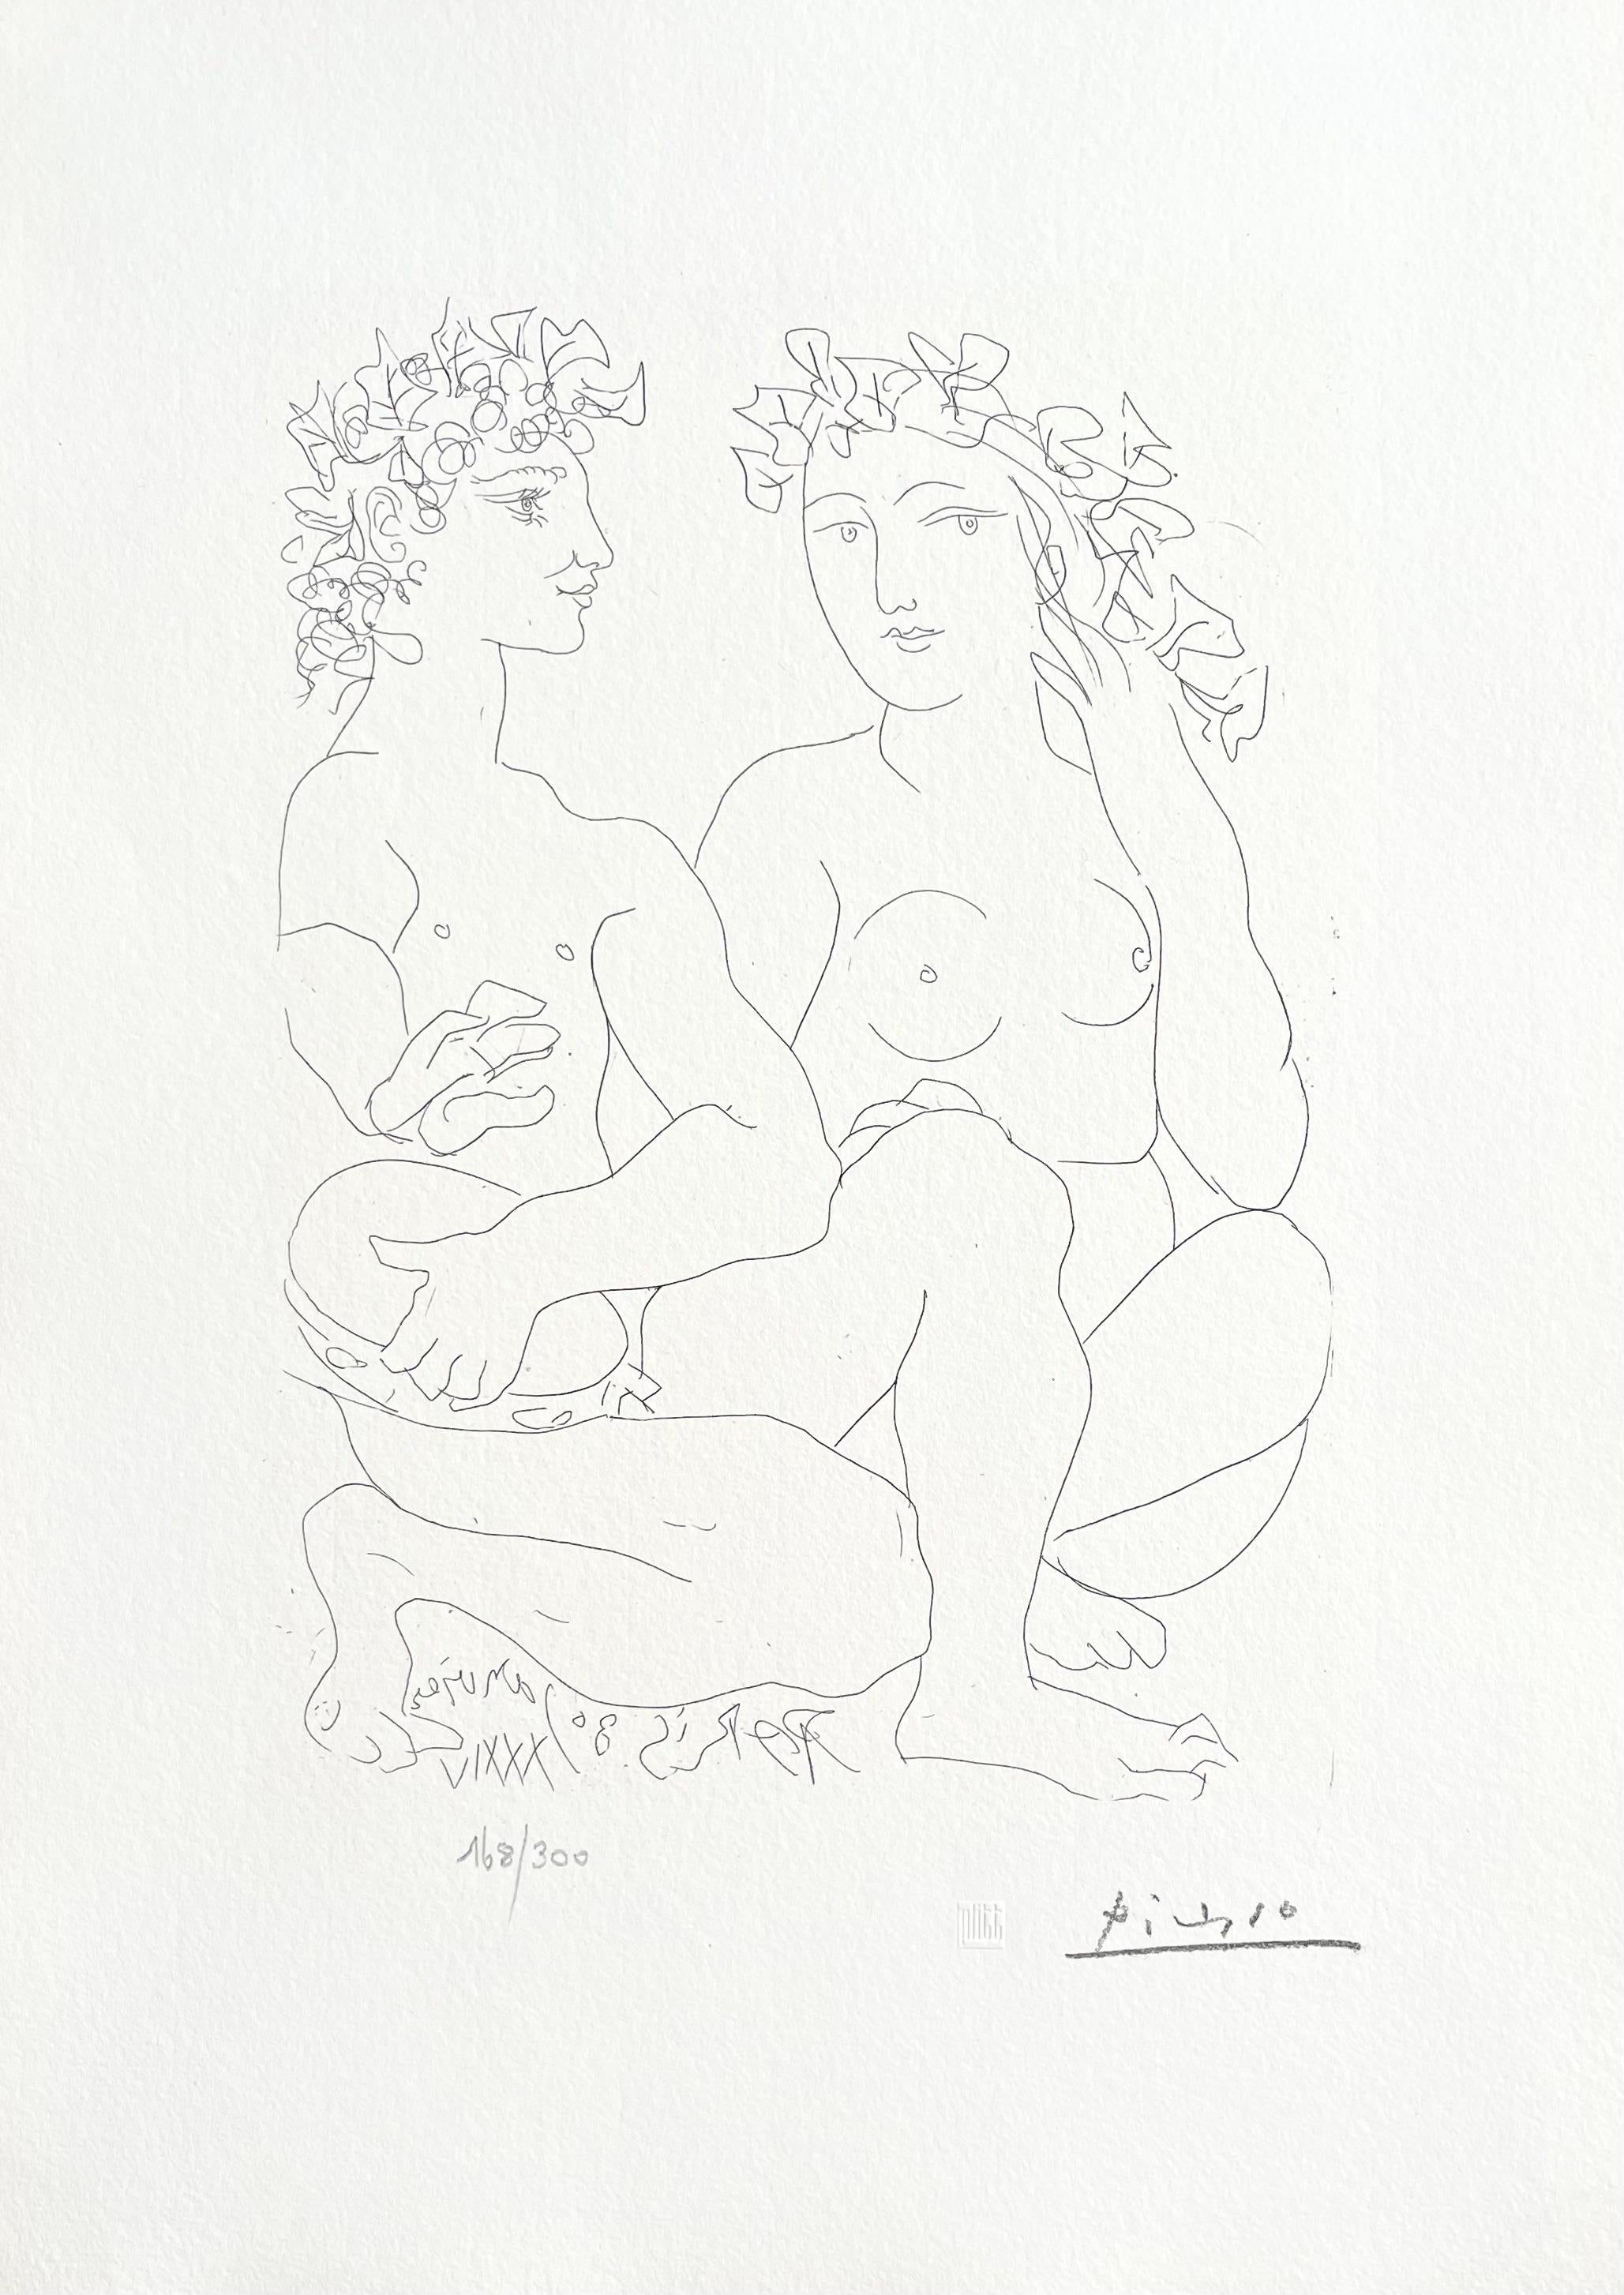 Picasso, two artworks (after) - Print by Pablo Picasso